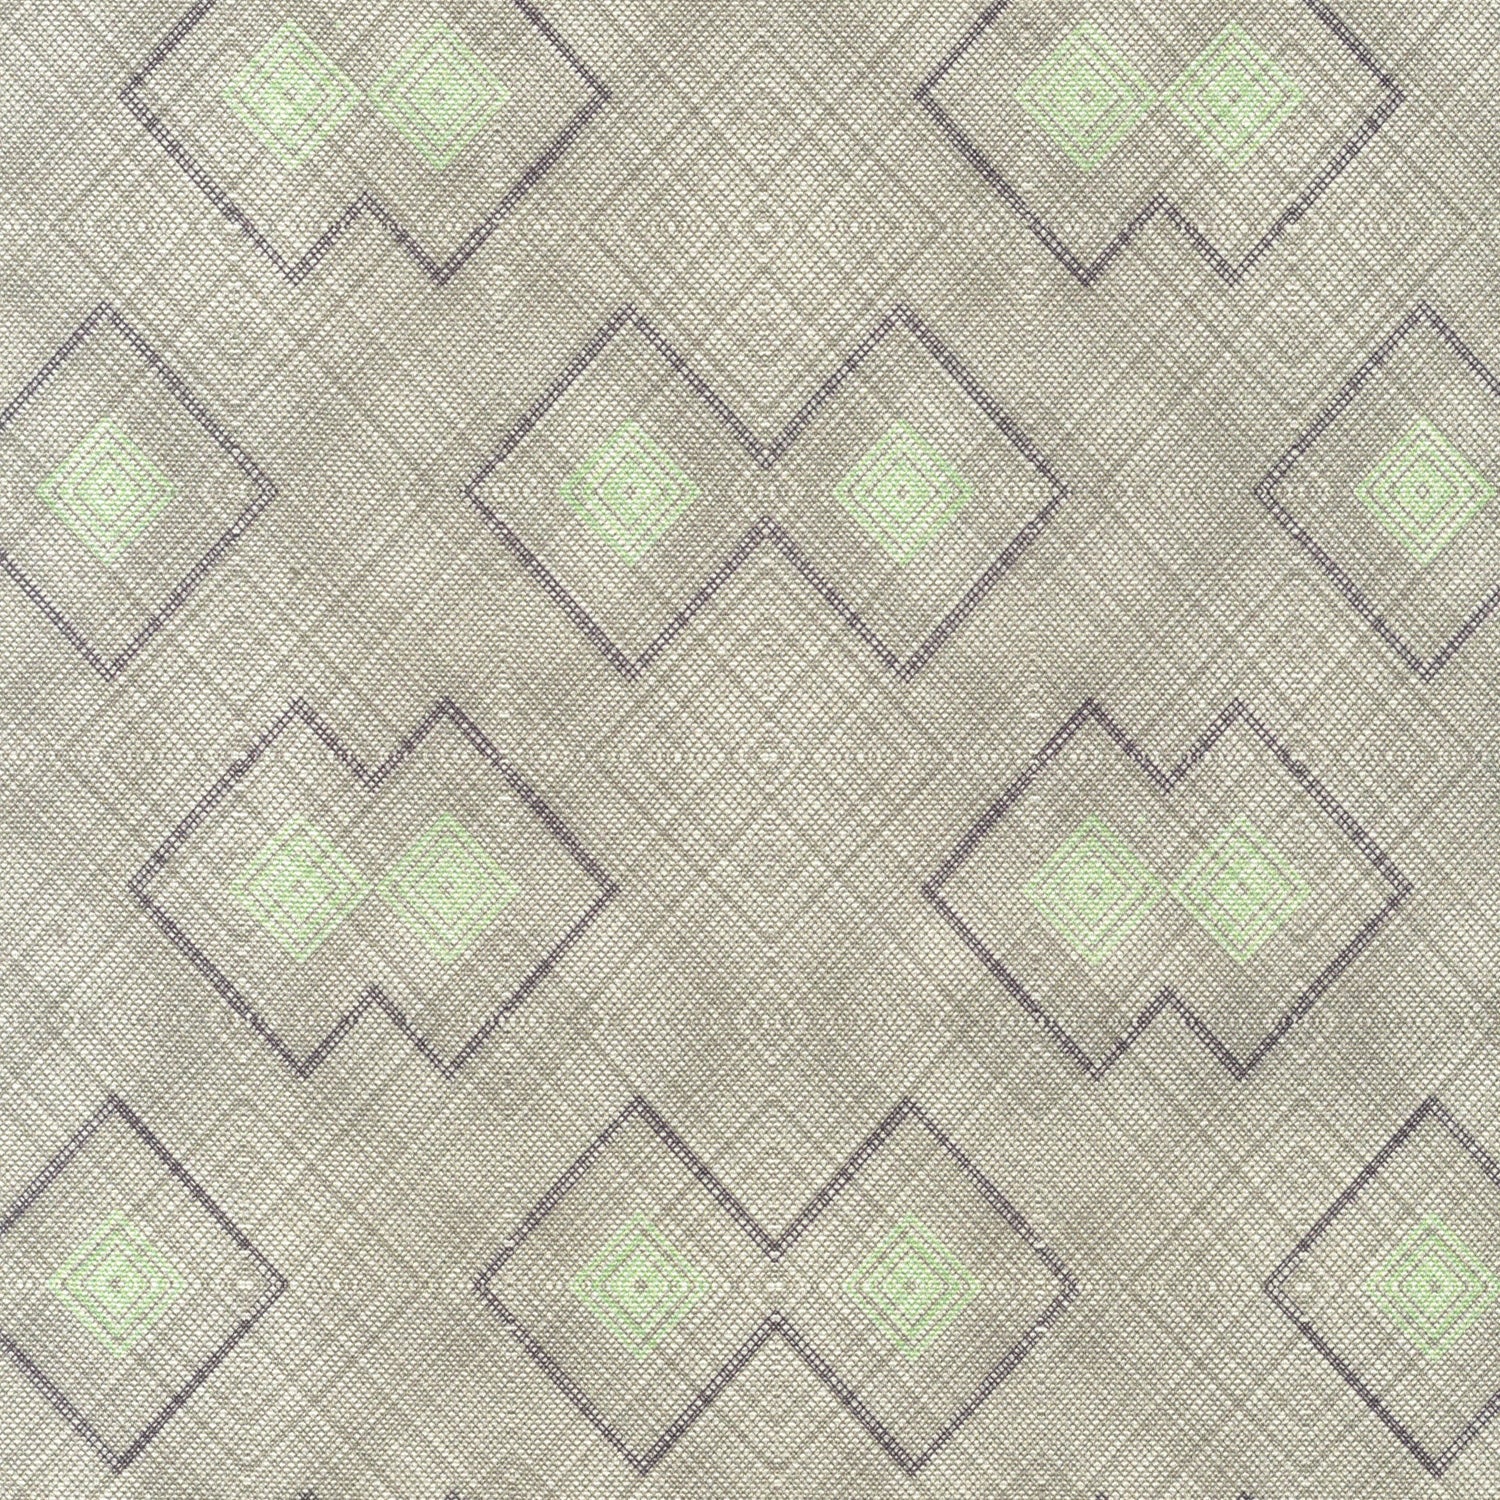 Detail of fabric in a detailed diamond lattice print in shades of light green and purple on a tan field.